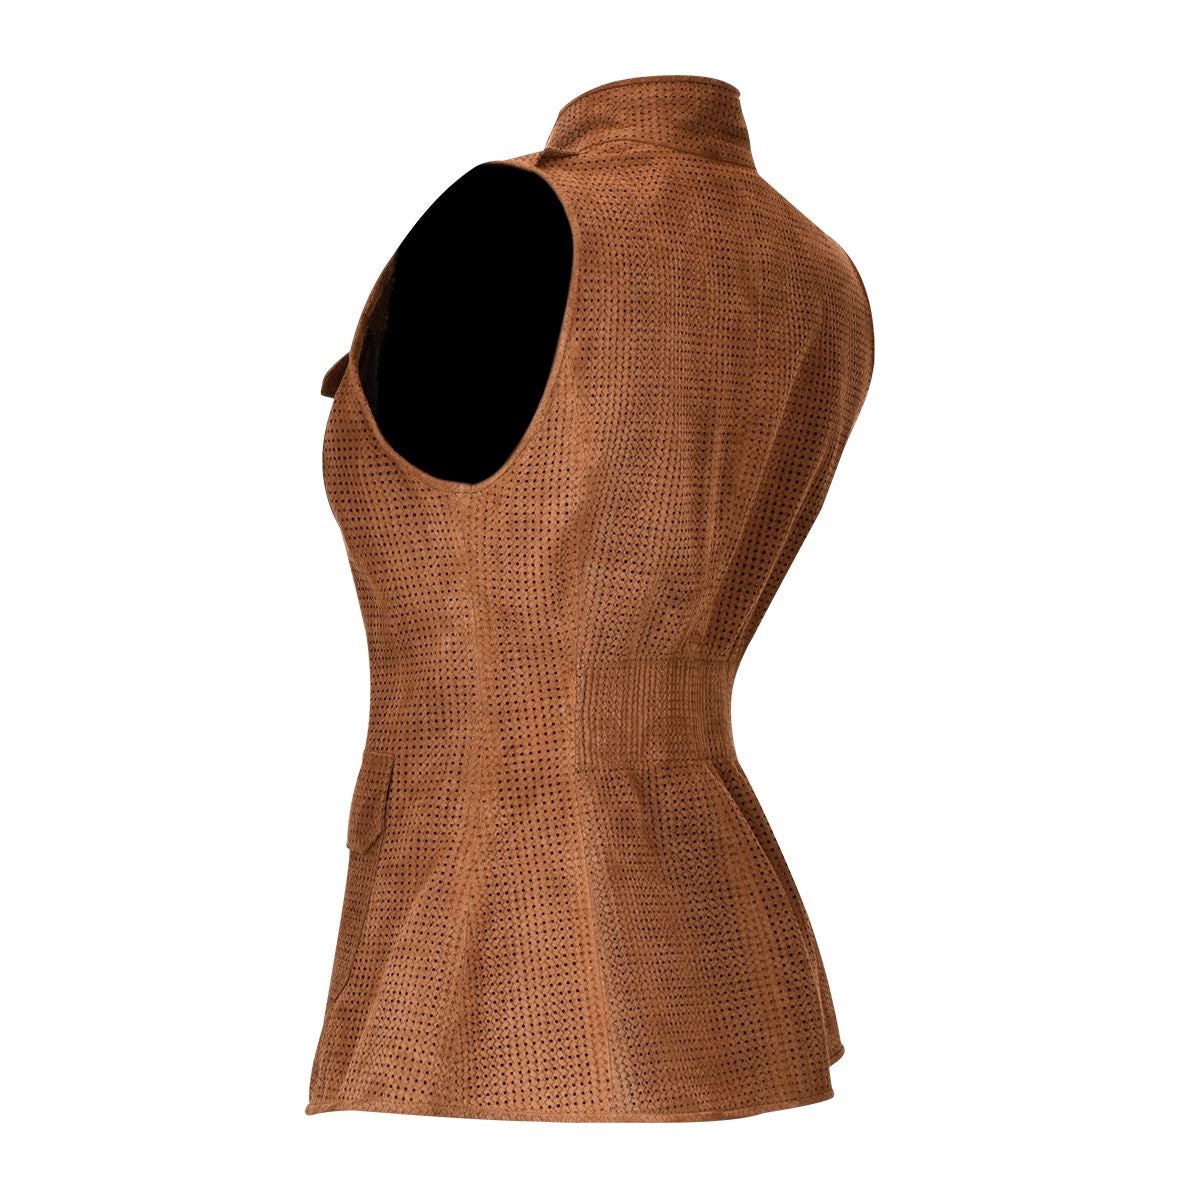 M264ATB - Cuadra cappuccino casual fashion suede leather vest for women-Kuet.us